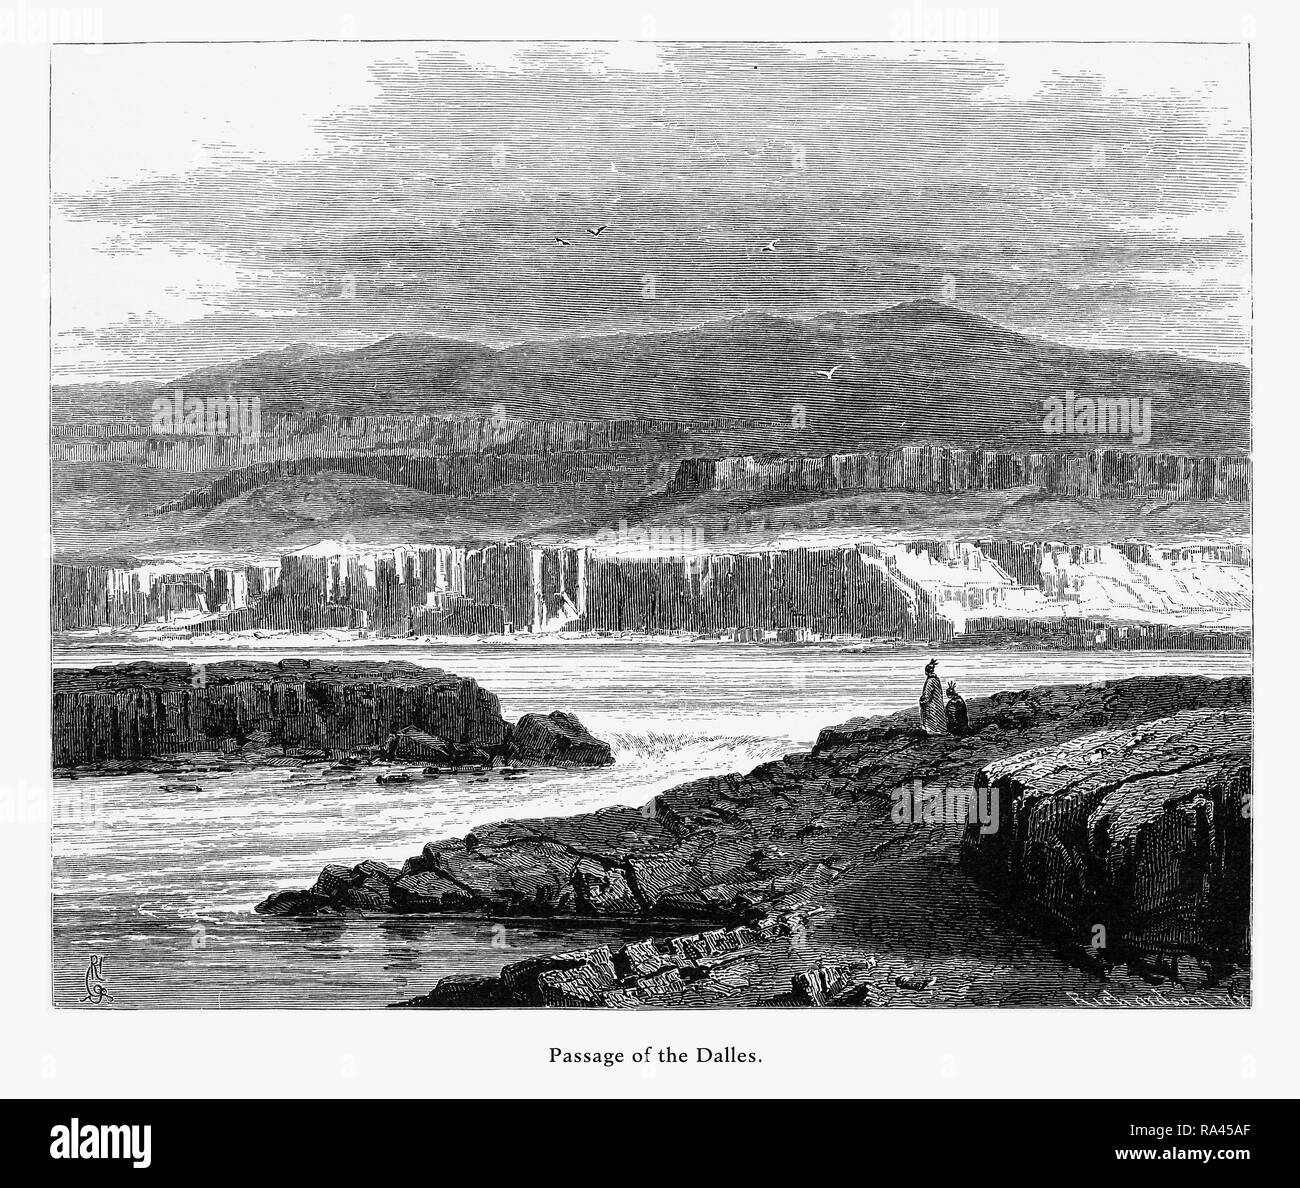 Passage of the Dalles, Columbia River, Oregon, United States, American Victorian Engraving, 1872 Stock Photo